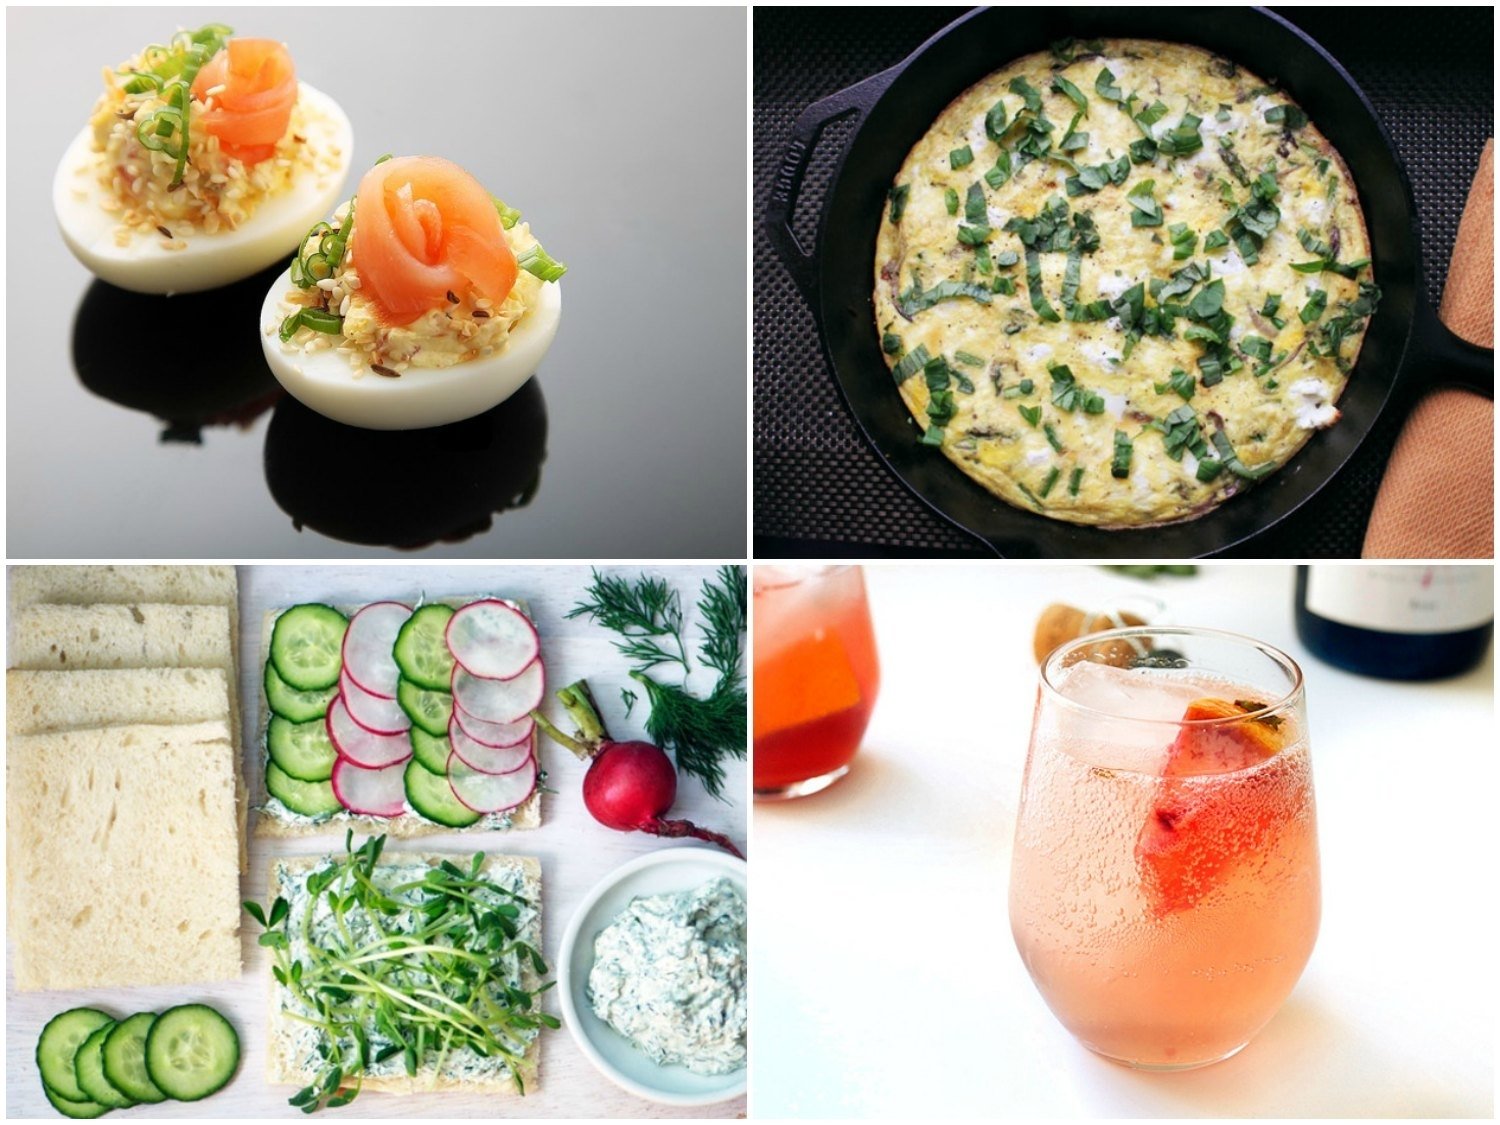 10 Elegant Brunch Ideas For A Party a brunch party menu to celebrate spring serious eats 2022